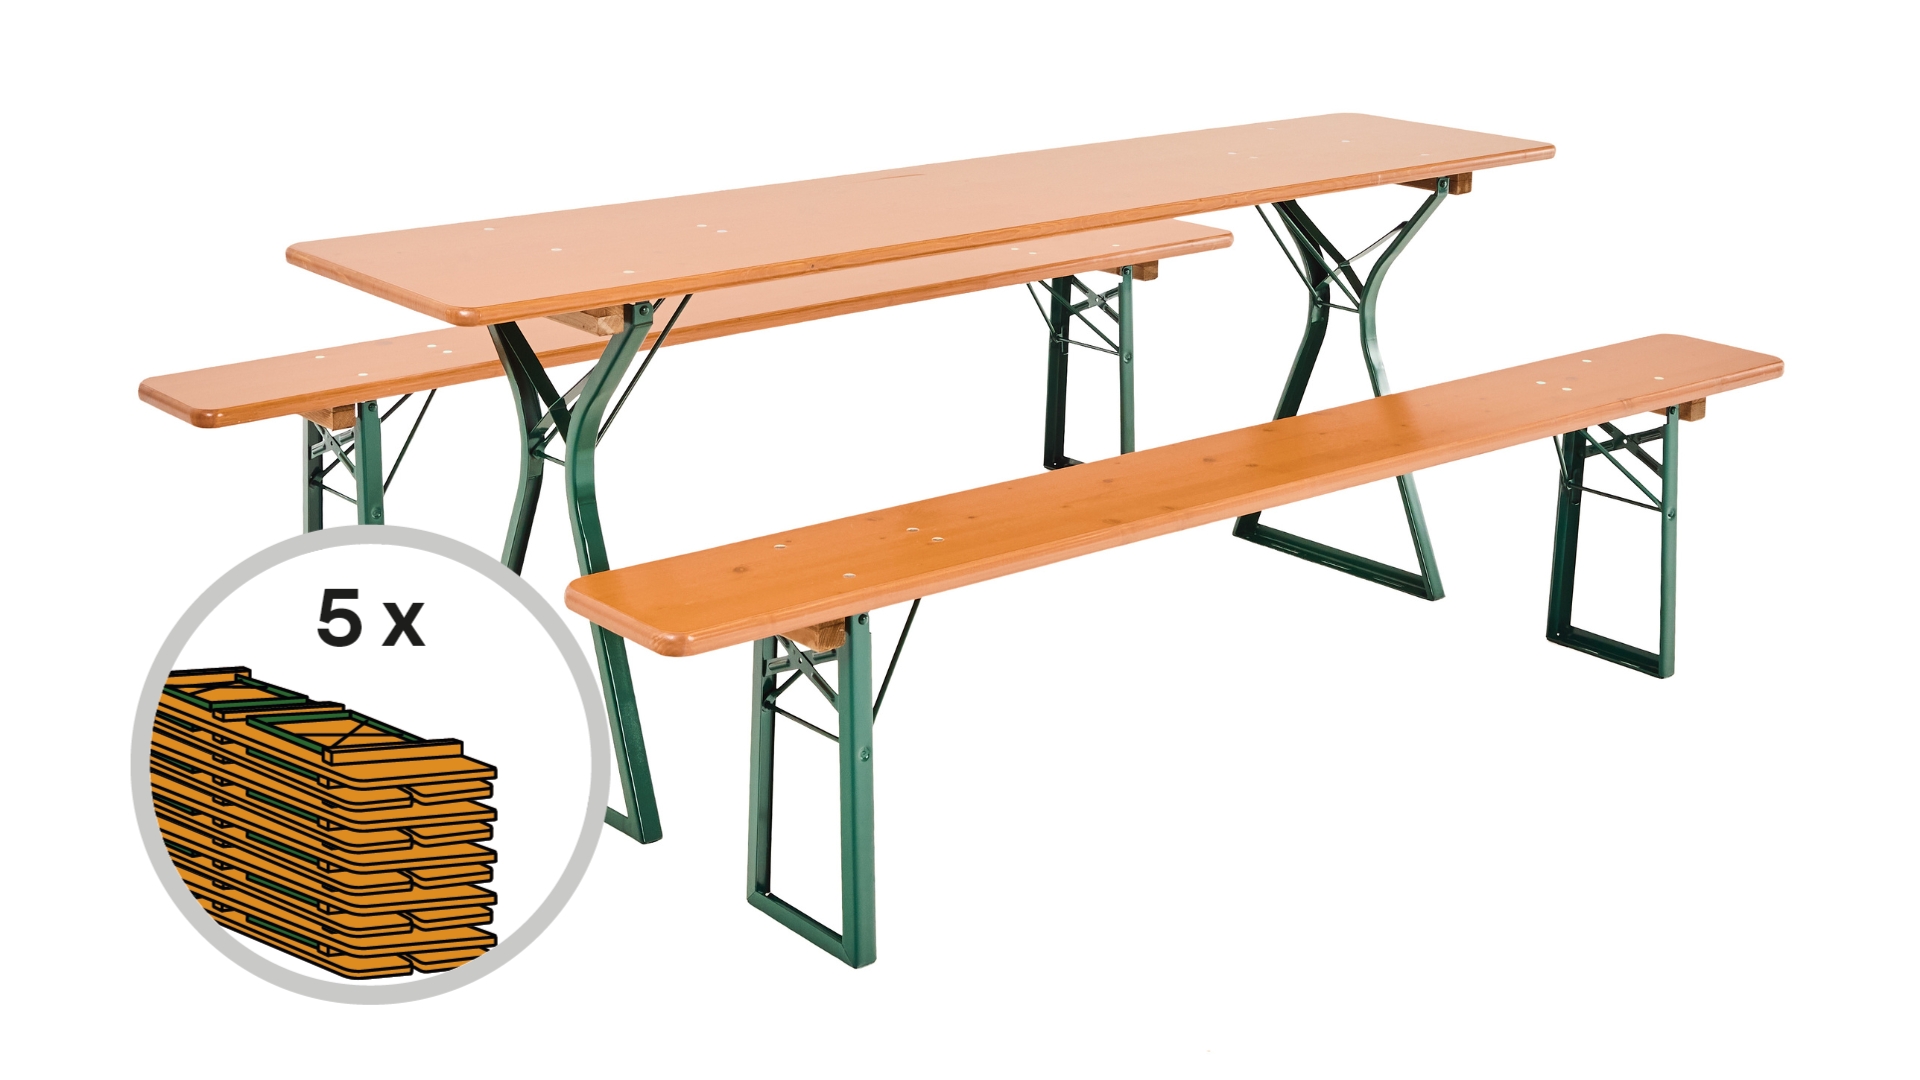 The set of 5 beer garden table sets with legroom in the color pine